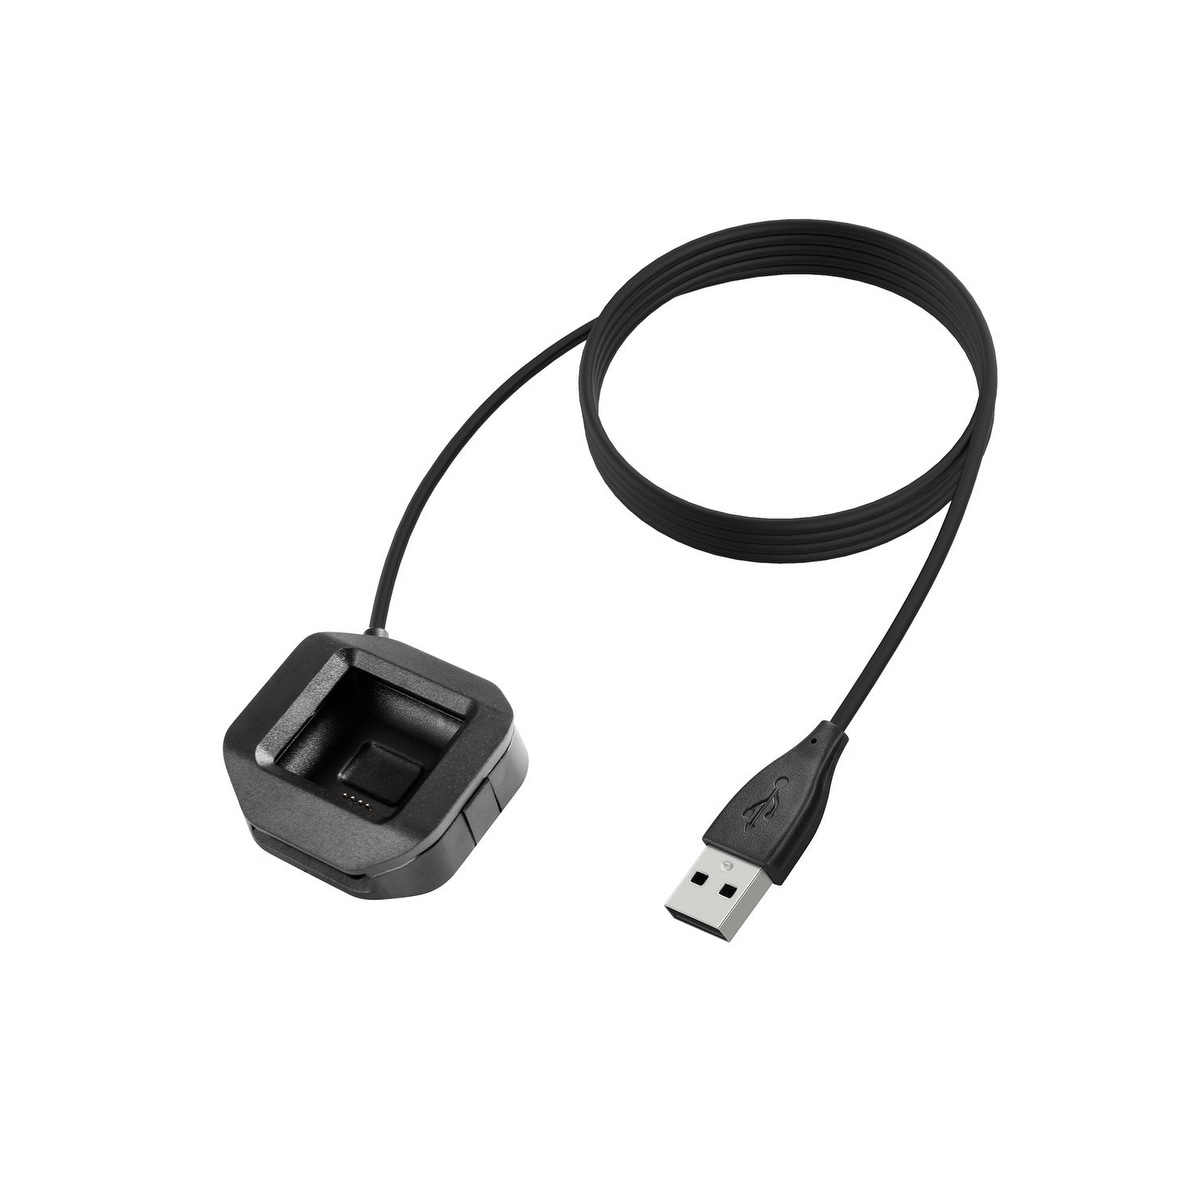 charger for a fitbit watch